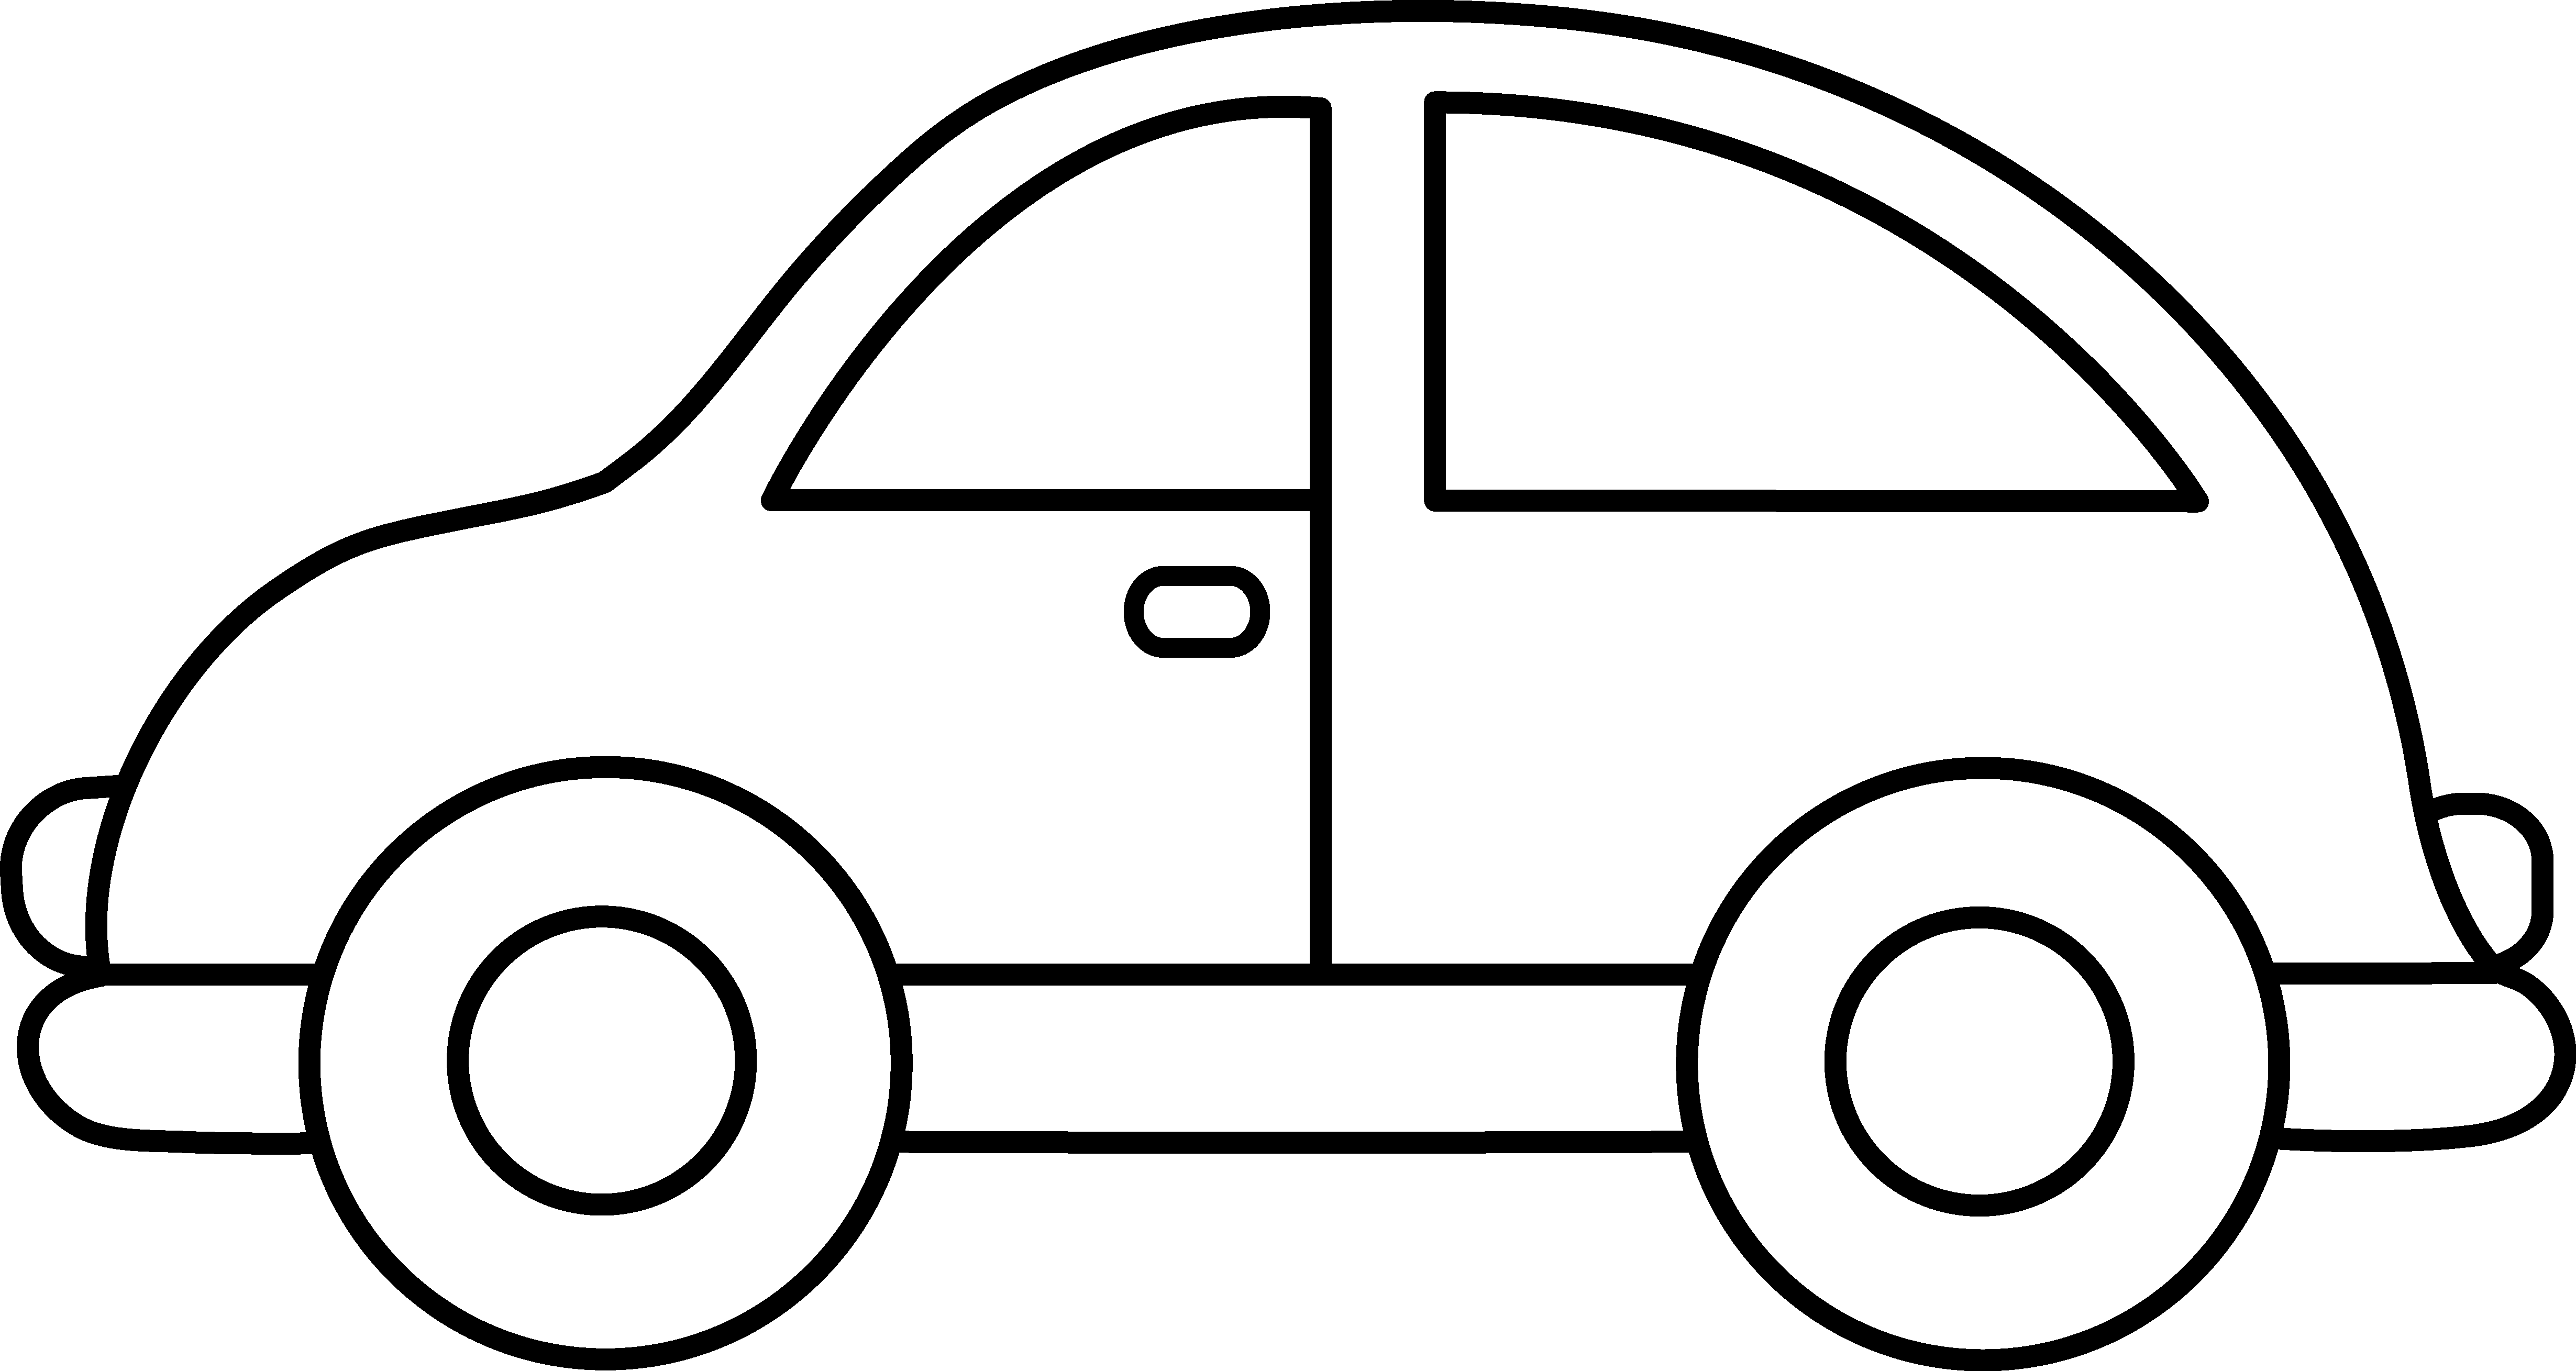 Car silhouette at getdrawings. Toy clipart line art